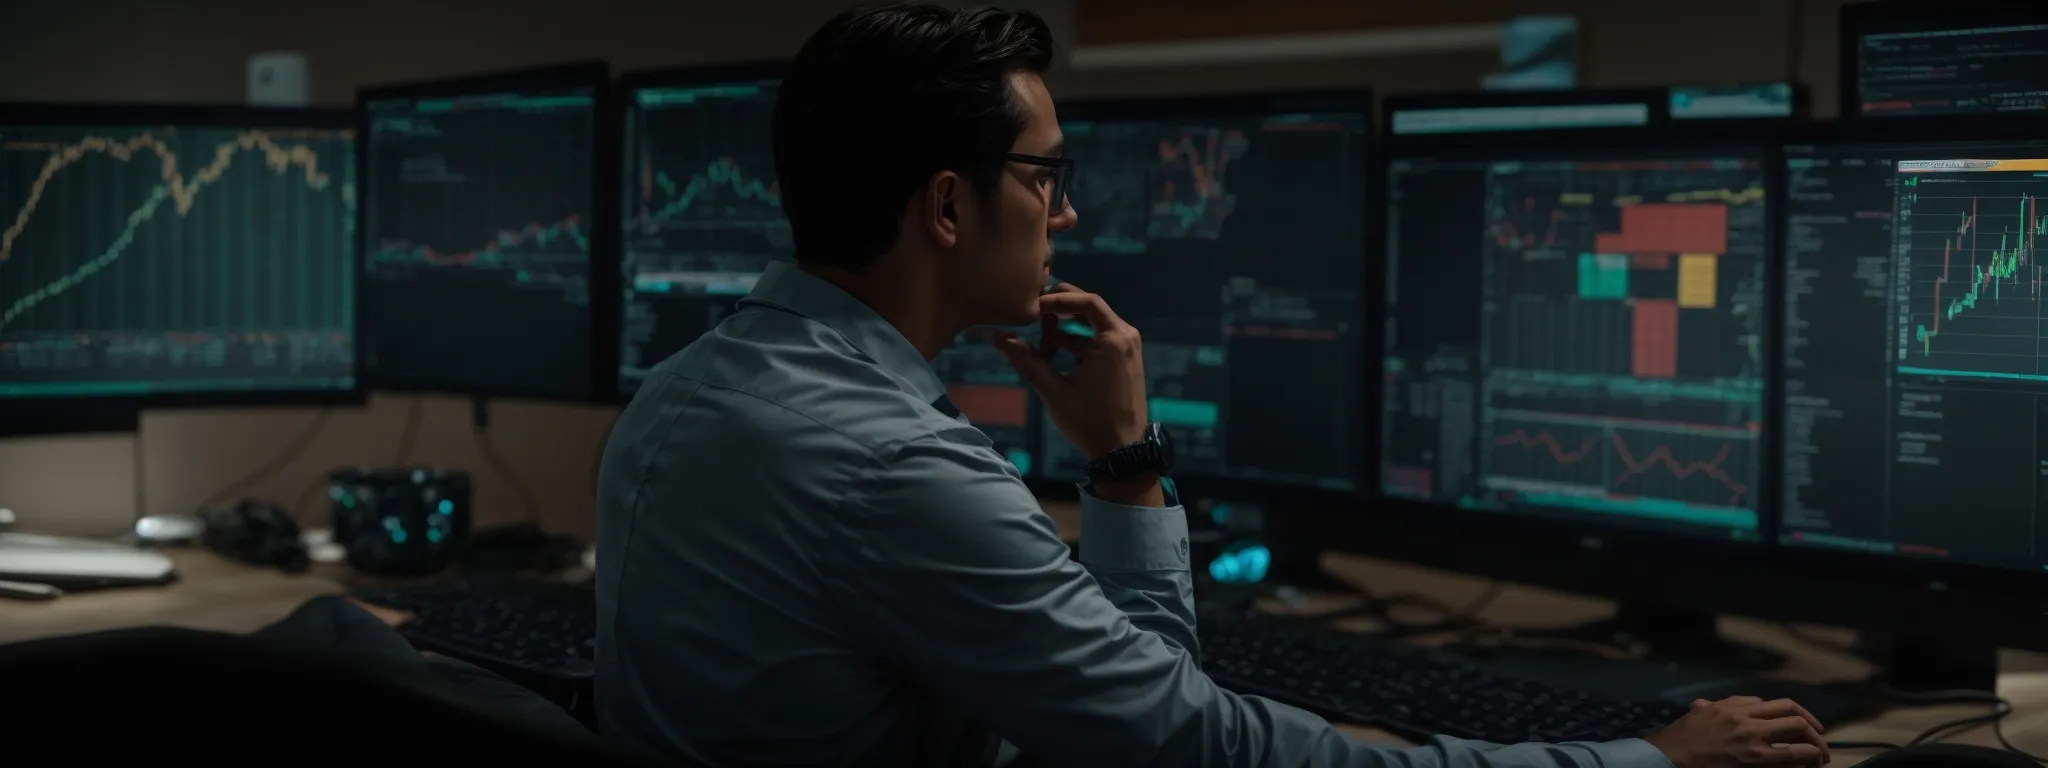 a focused individual intently analyzing vibrant graphs and data charts on a computer screen, highlighting keyword performance metrics.